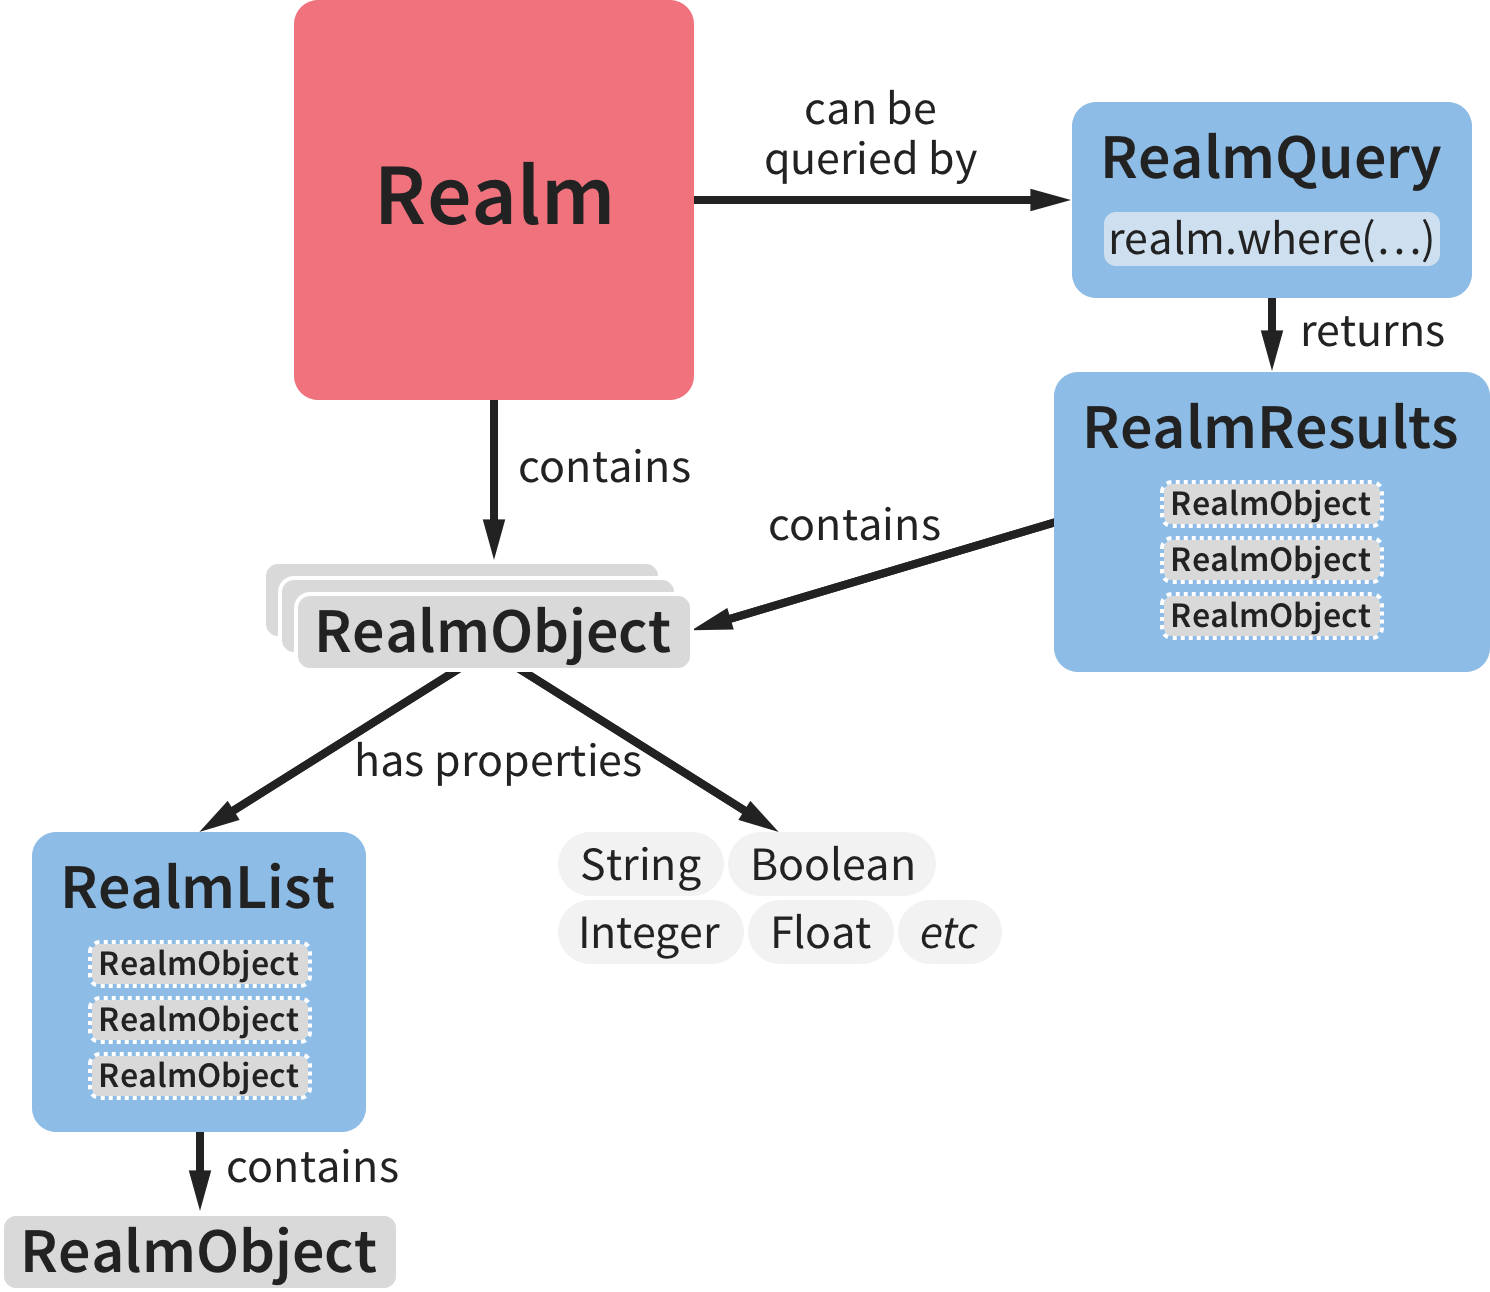 Overview of Realm